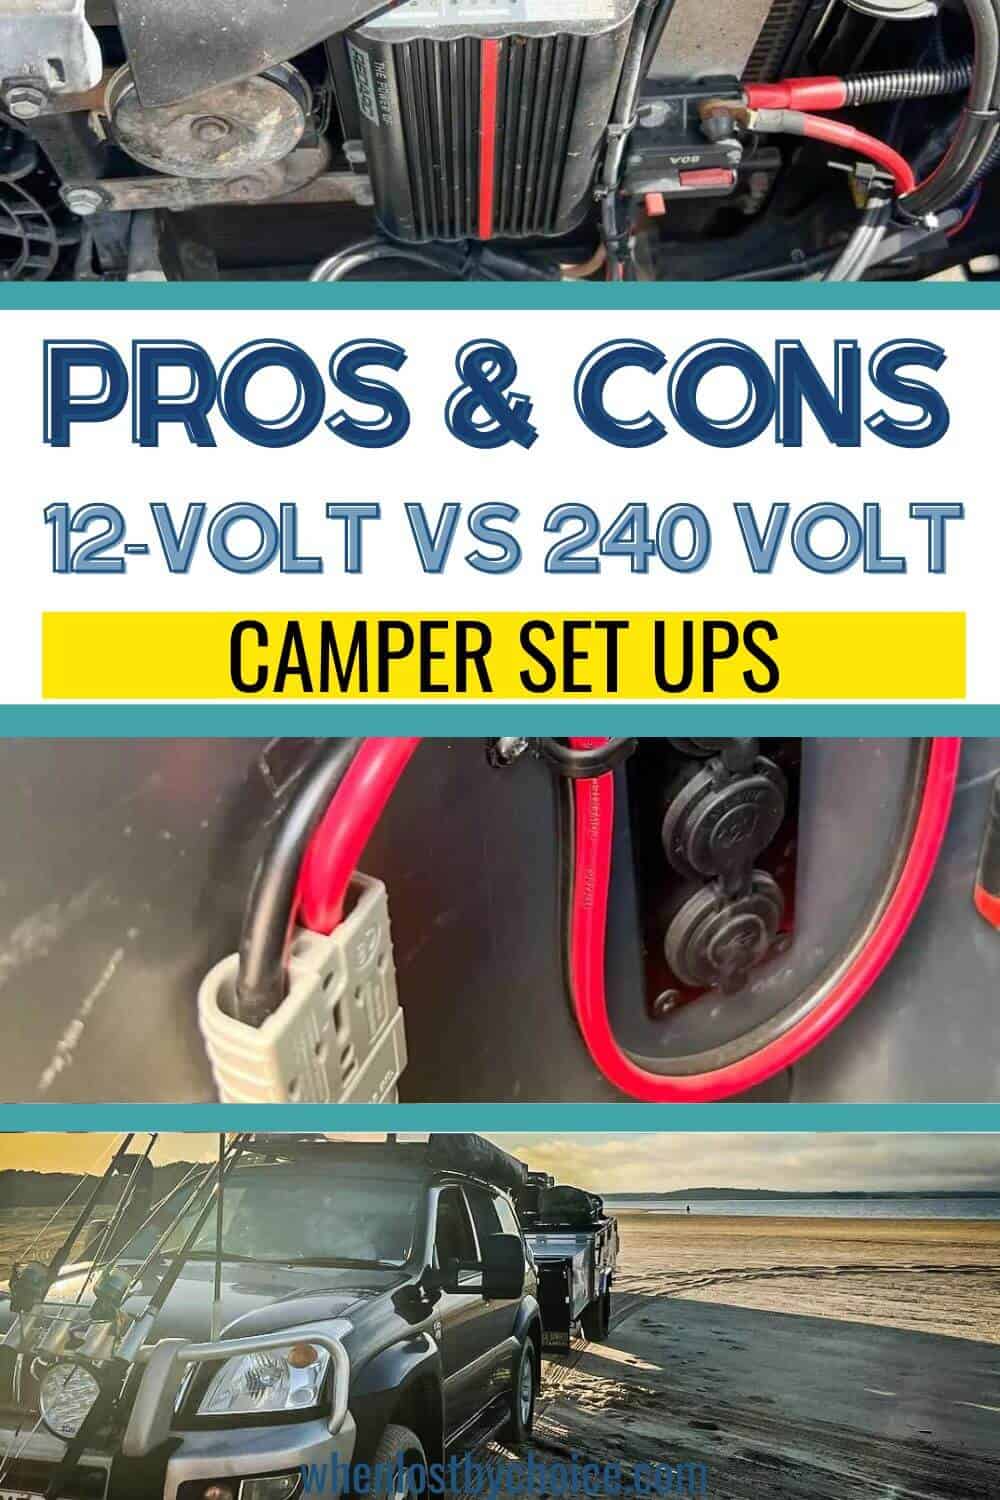 3 images of camping power set ups with text box that reads pros and cons of 12-volt vs 240 volt camper set ups